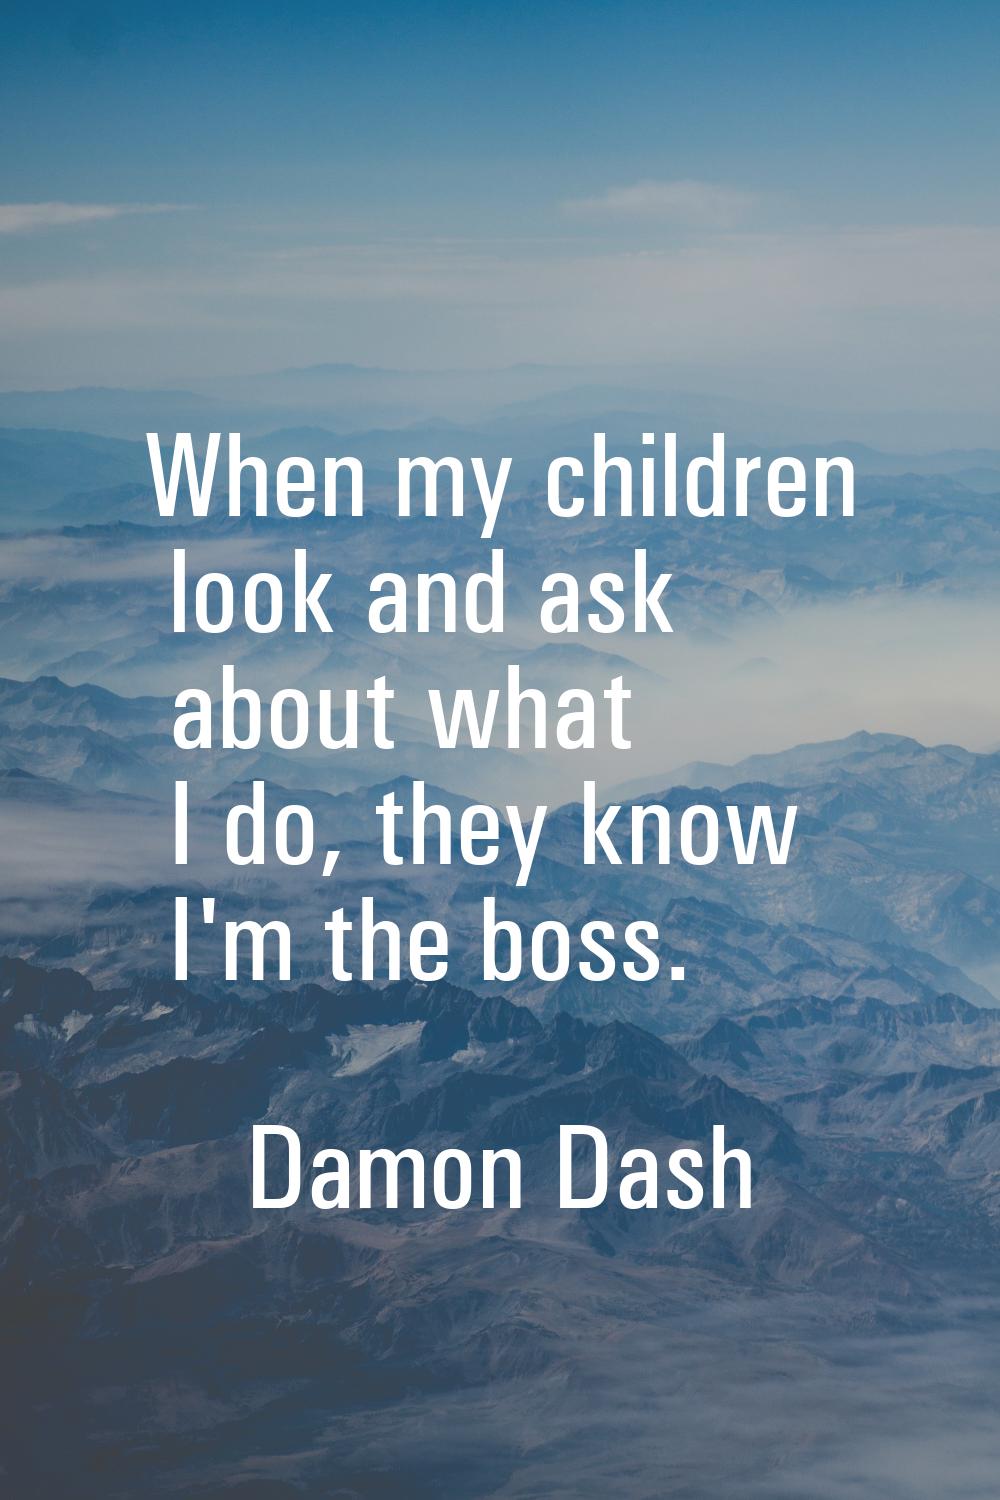 When my children look and ask about what I do, they know I'm the boss.